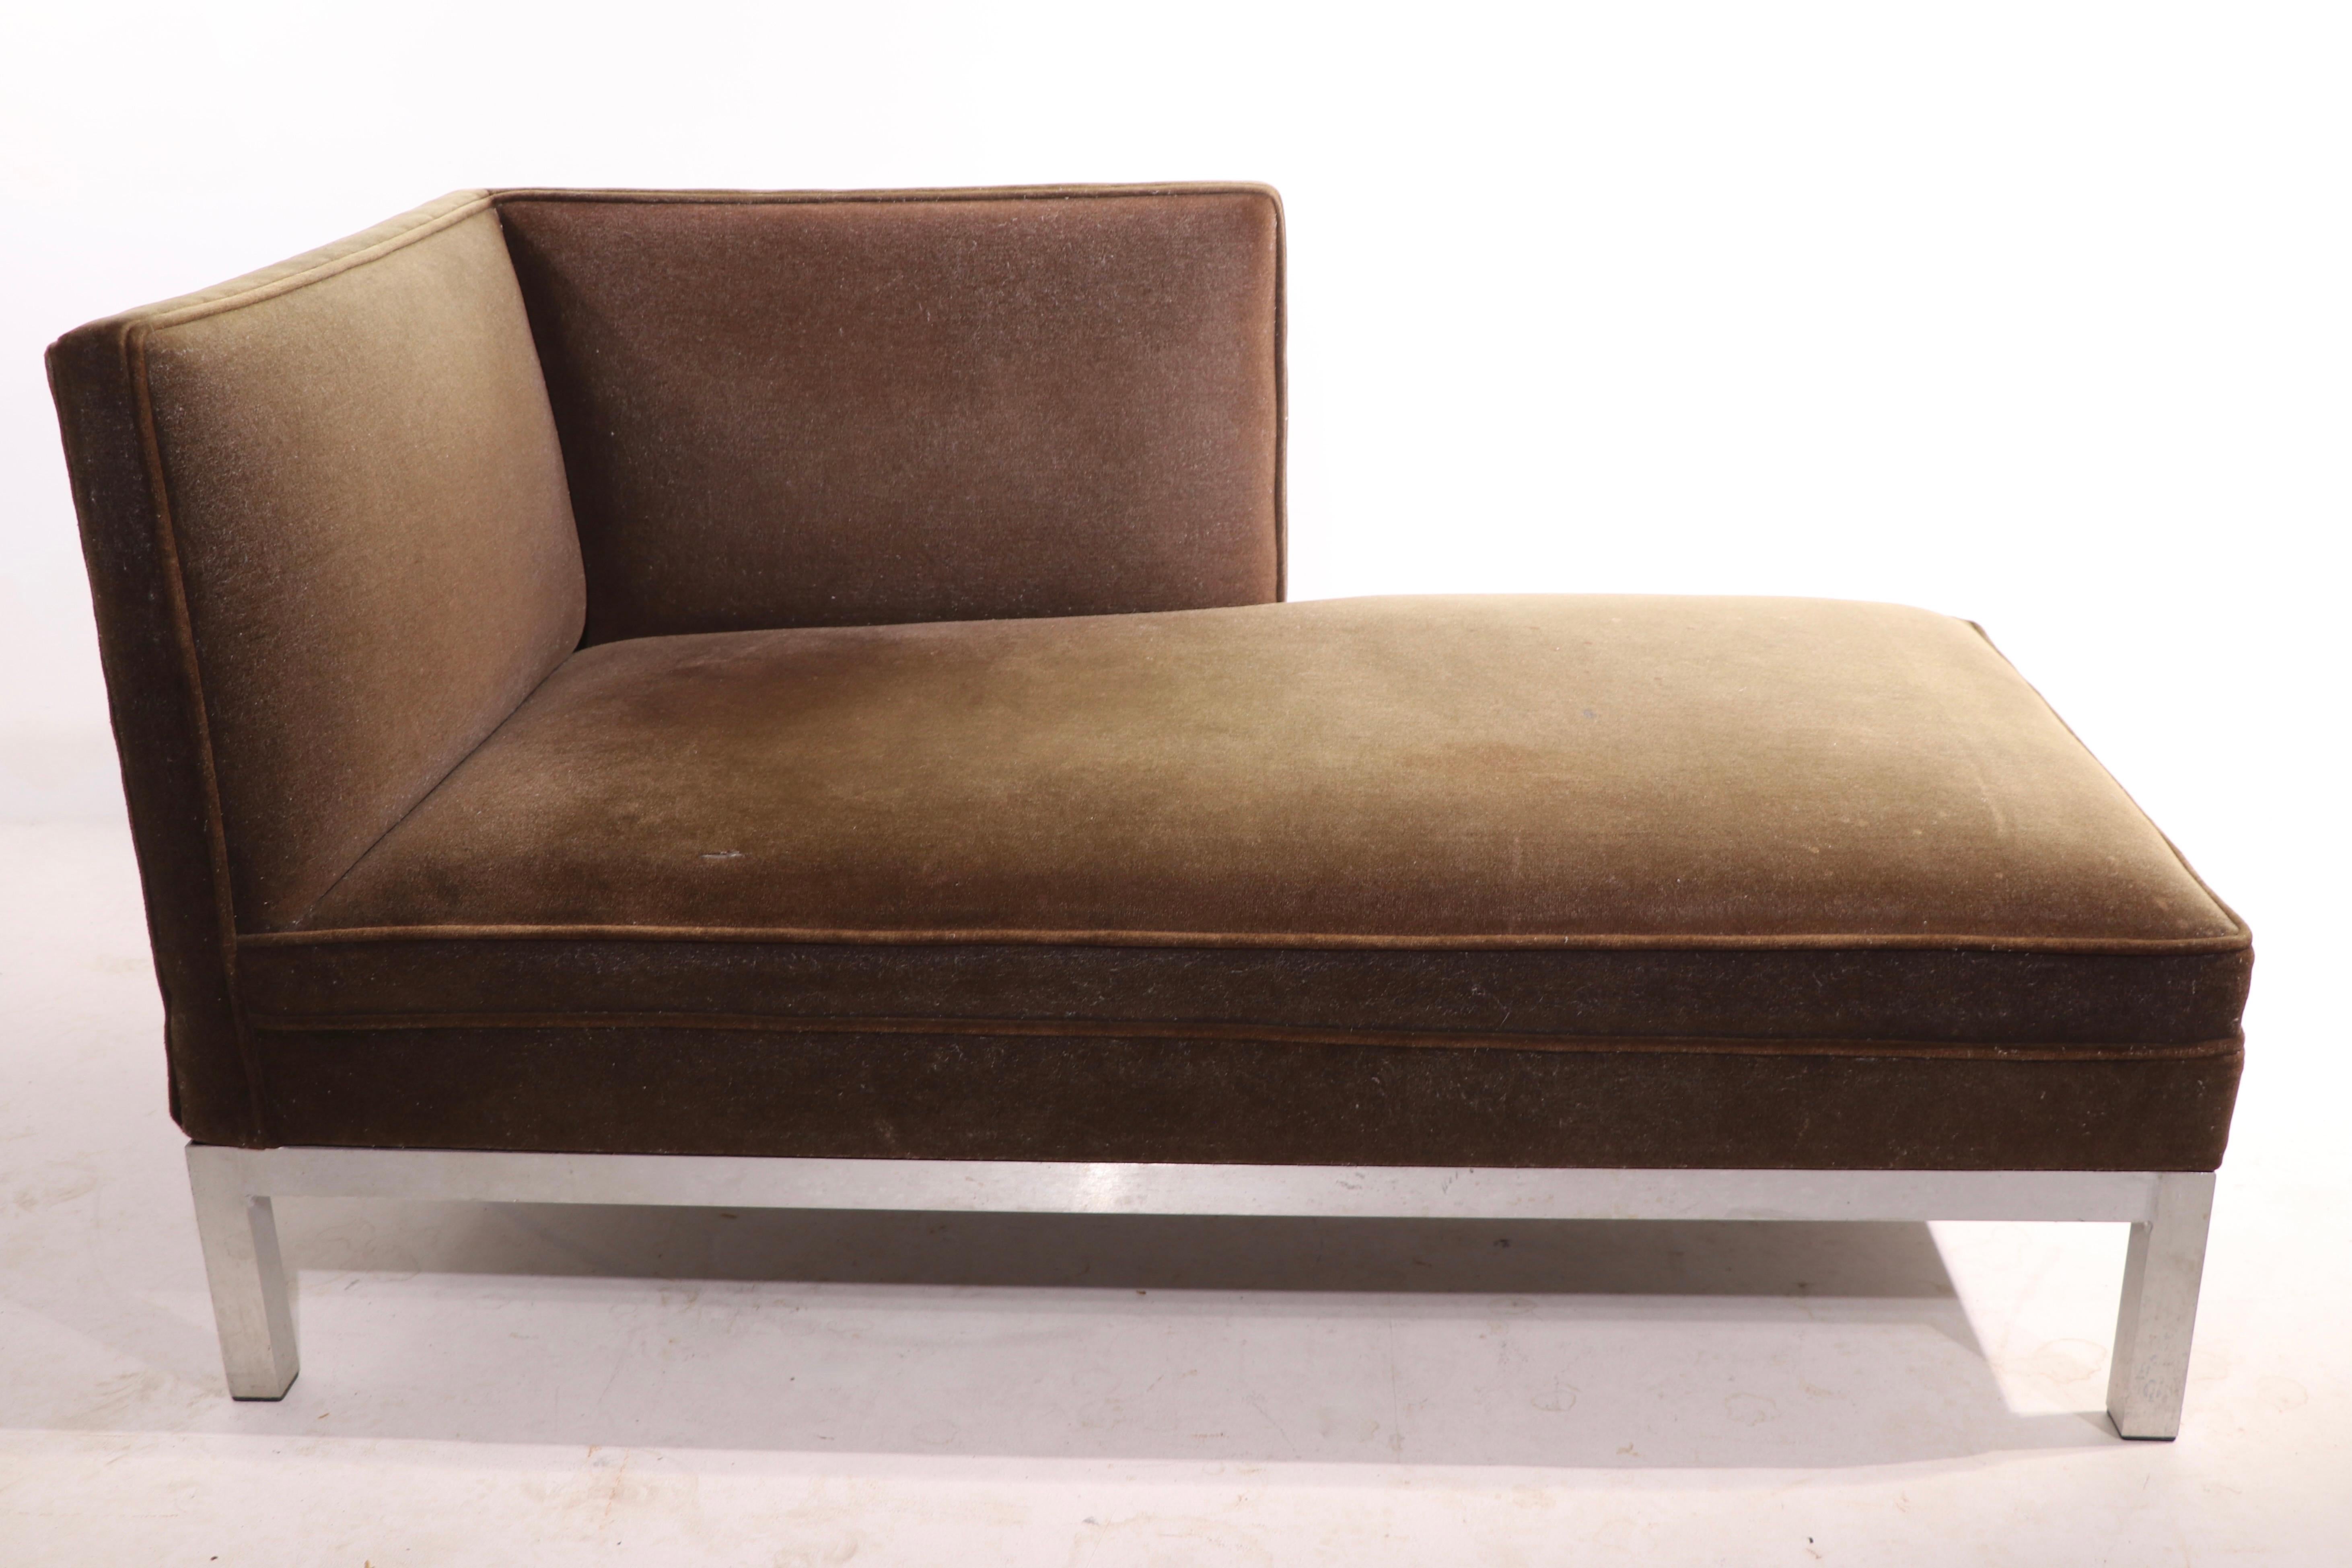 Brown Jordan Charter Furniture Oslo Chaise 1 Available 4